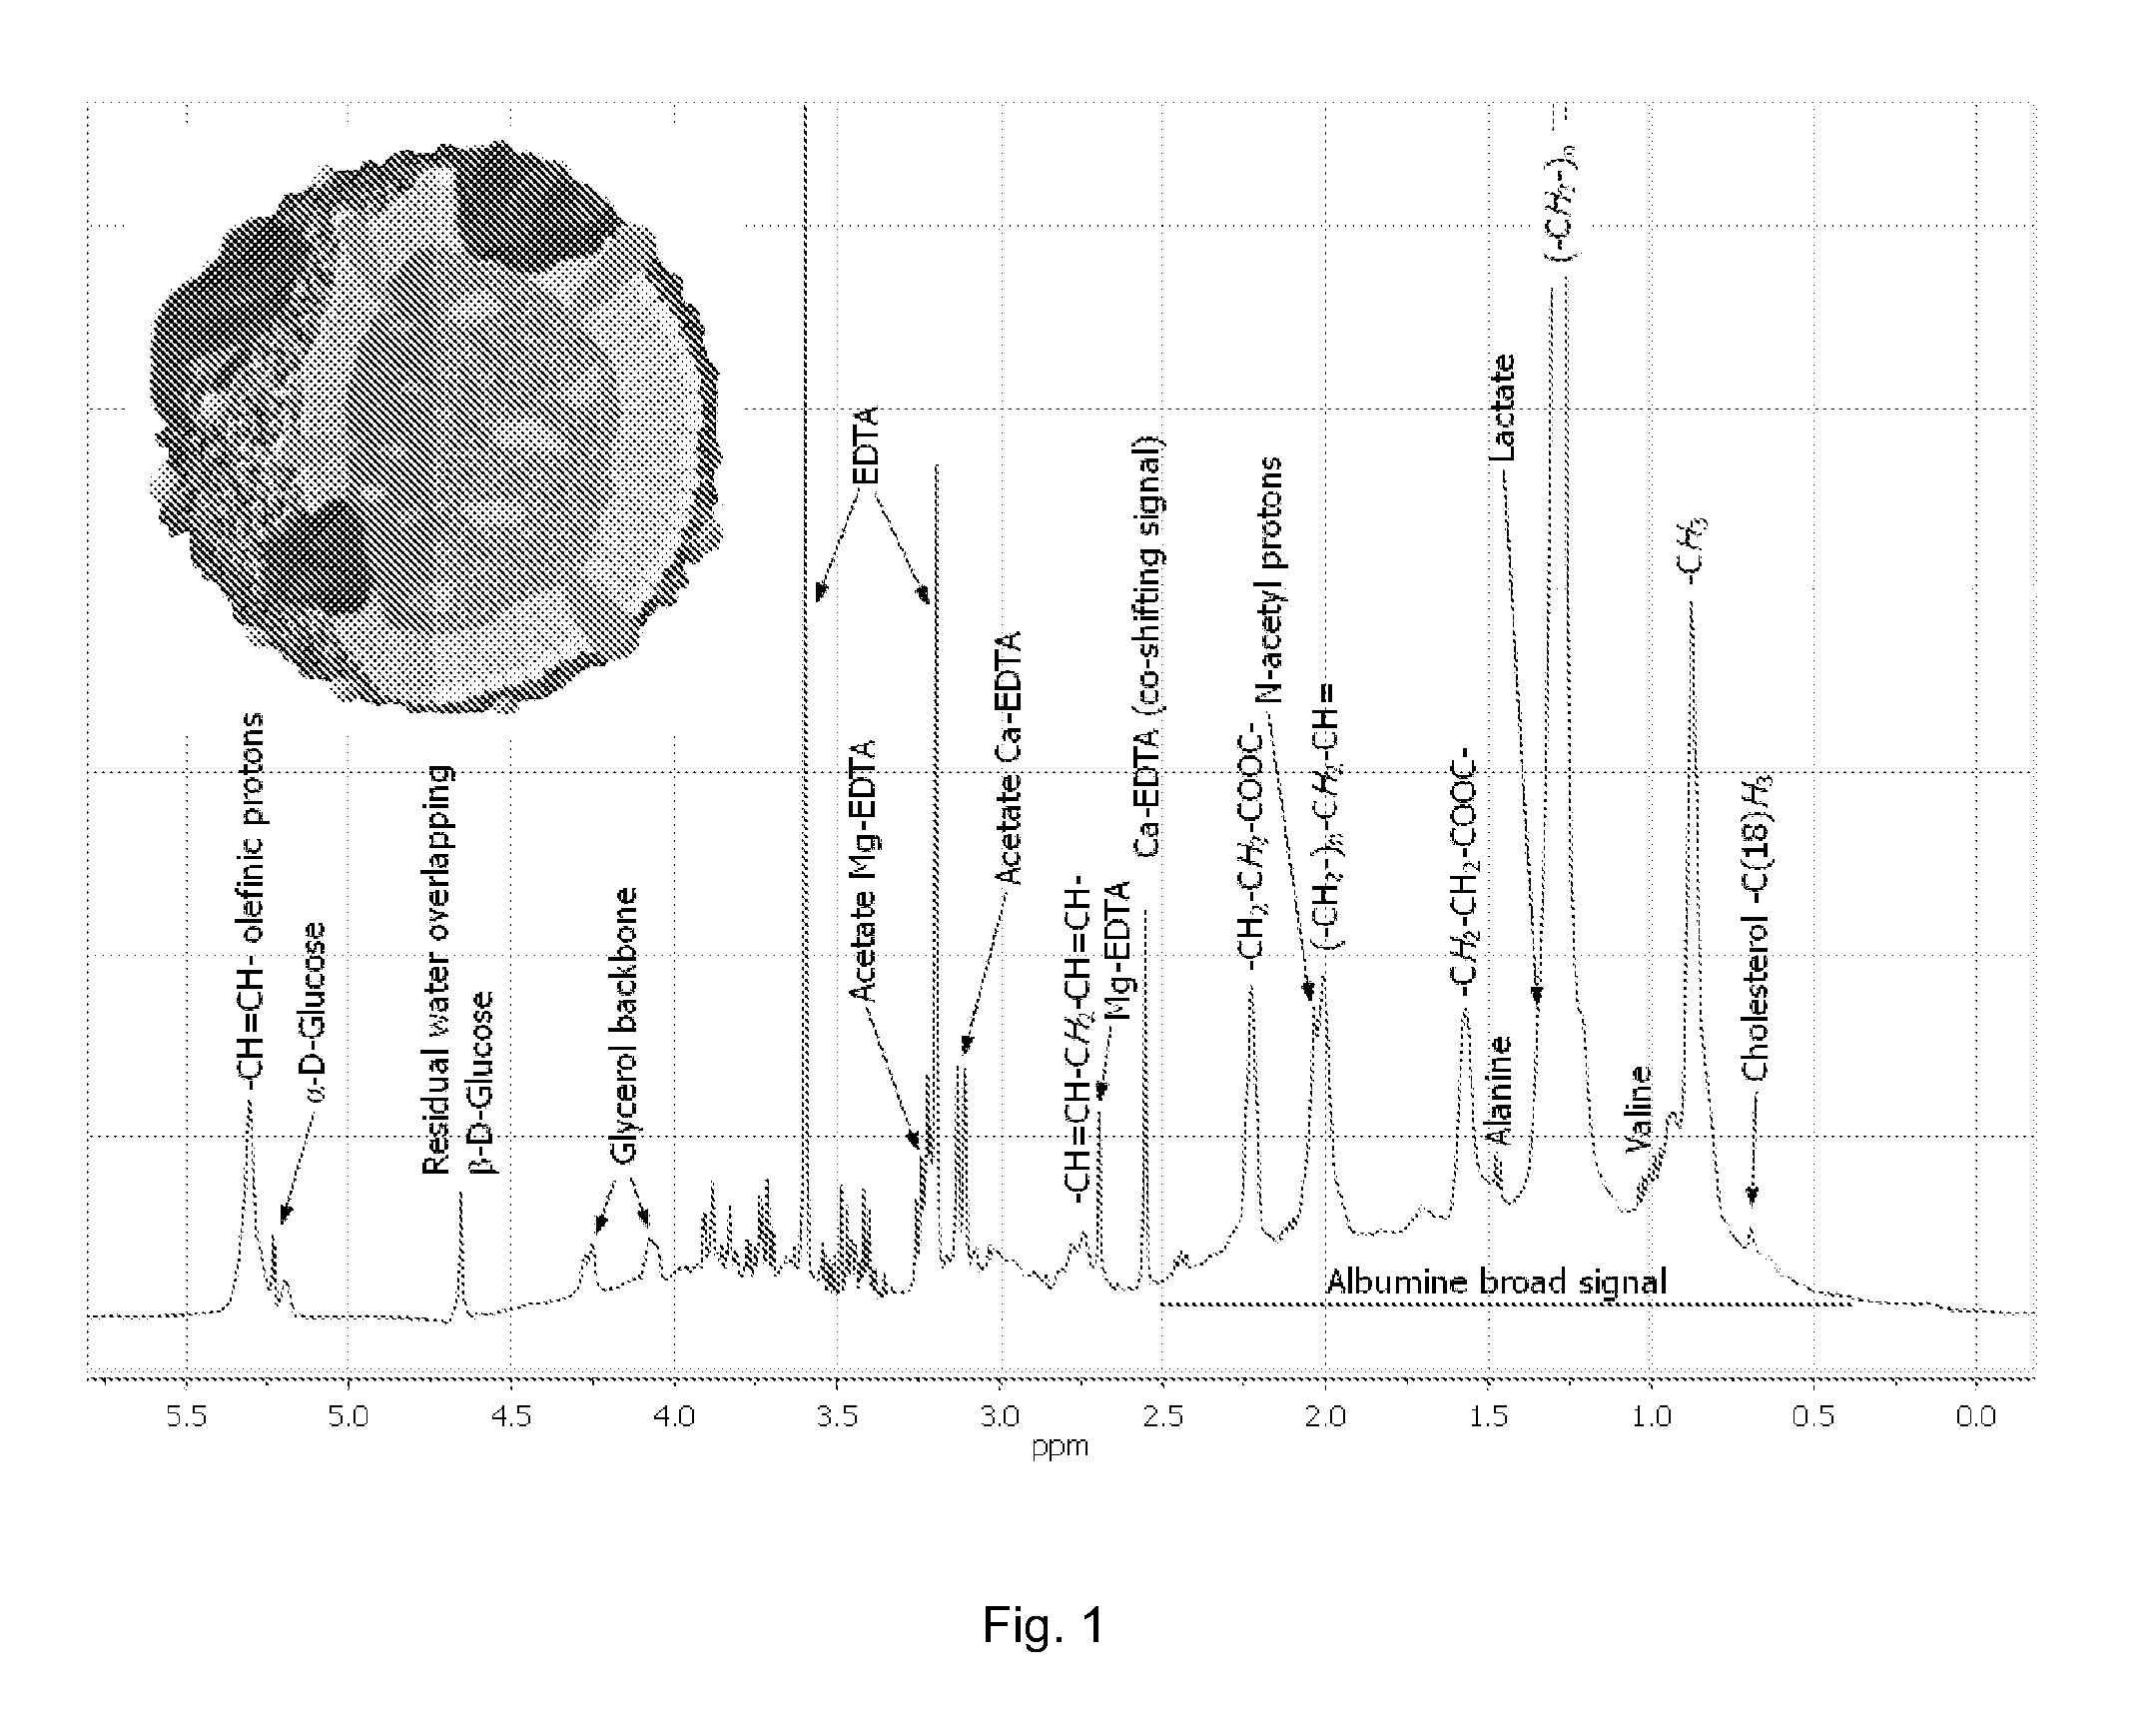 Method for prediction of lipoprotein content from nmr data